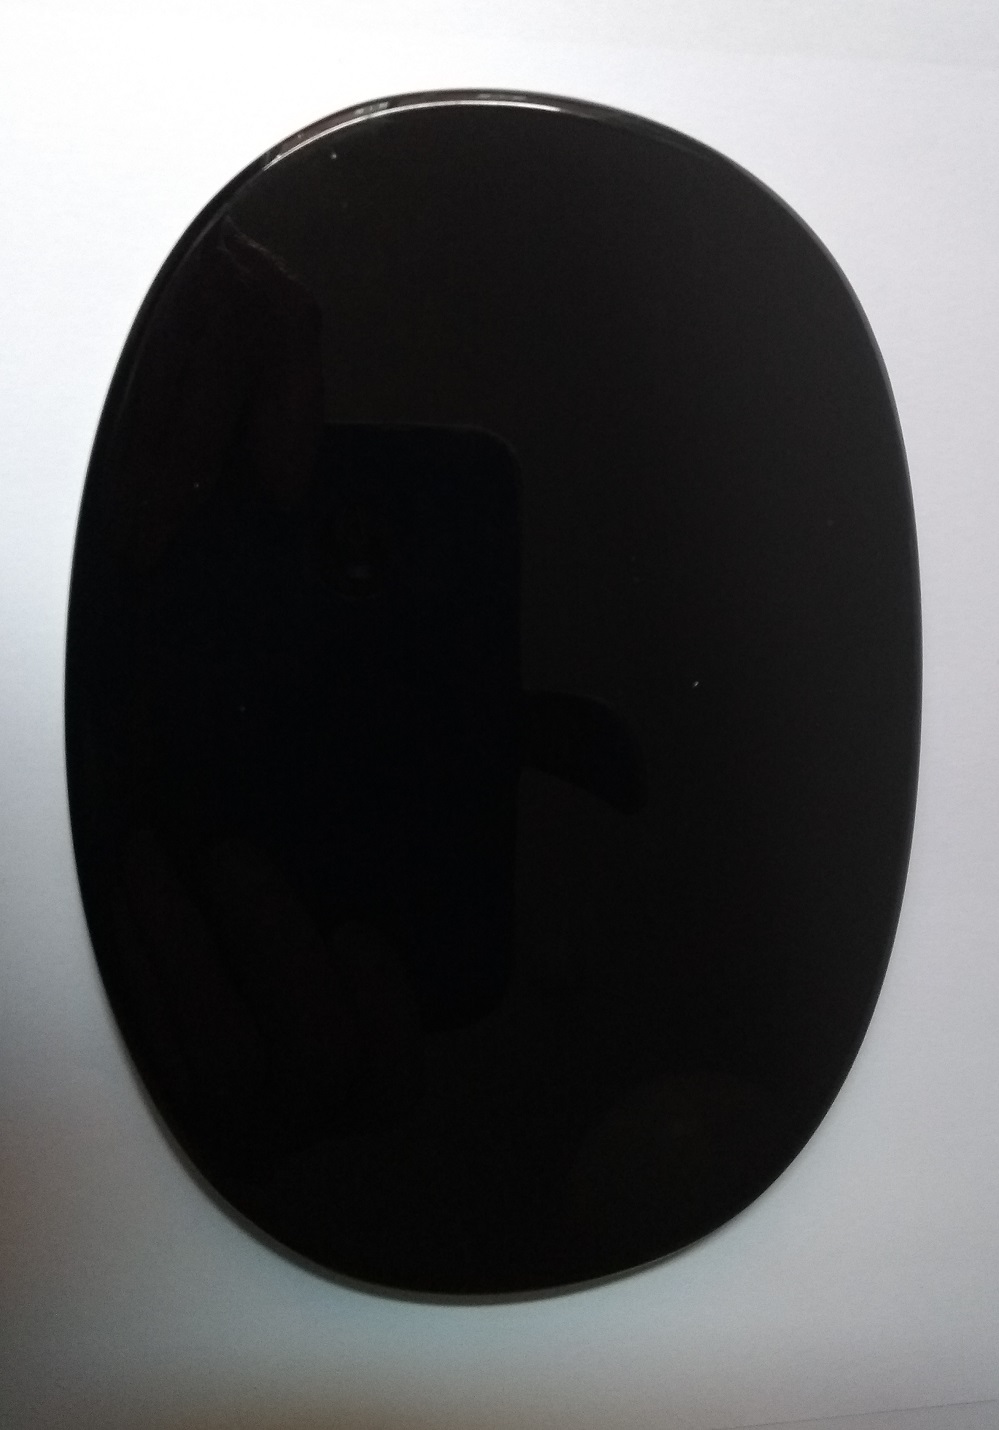 Black Obsidian Scrying Mirror (Magick Mirror) Oval 5.6 Inch by 4 Inch No 228